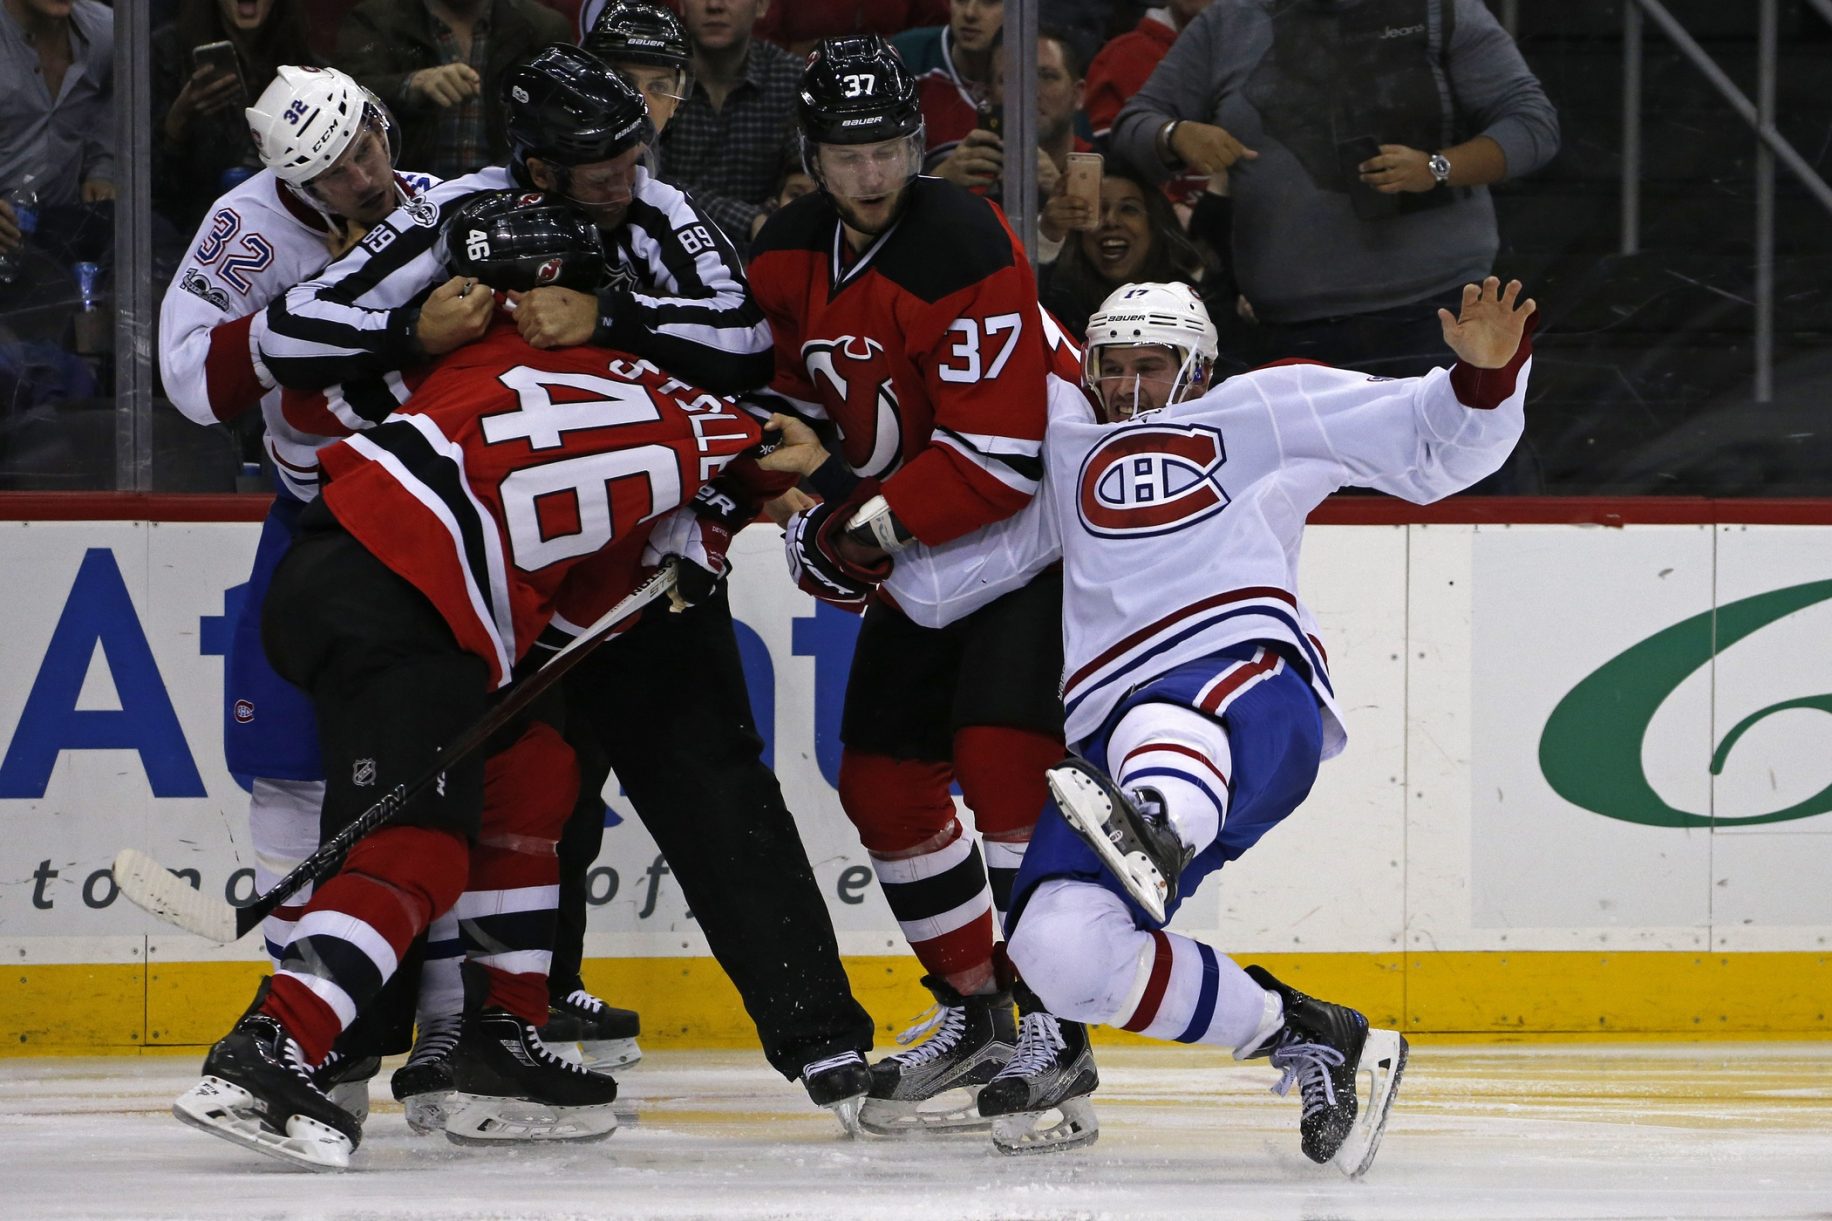 New Jersey Devils: Karl Stollery's hit was a questionable major 2